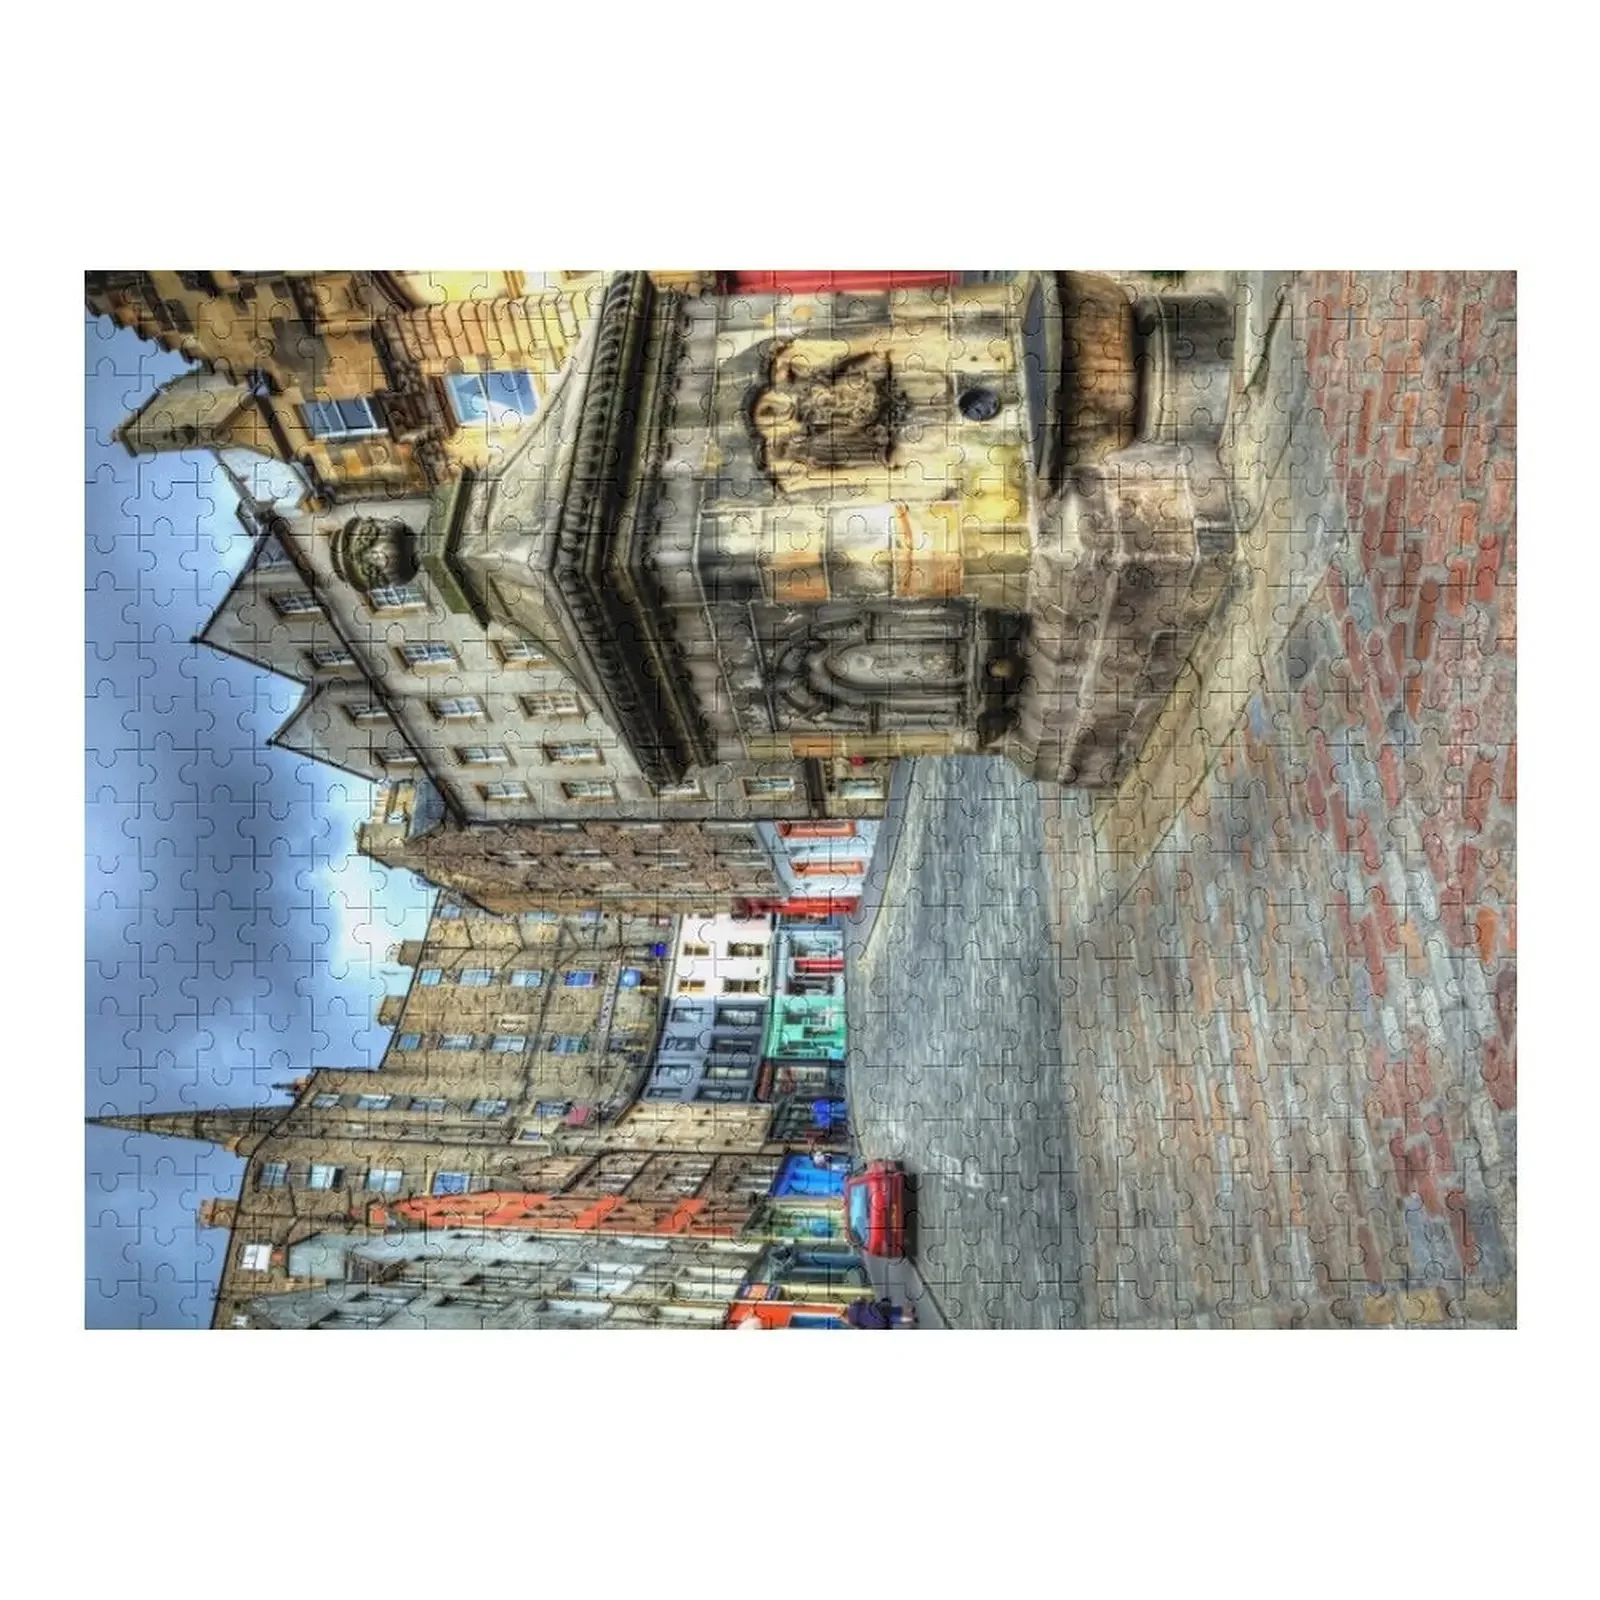 Grassmarket - Edinburgh Jigsaw Puzzle Customized Toys For Kids Personalized Toy Customs With Photo Custom Kids Toy Puzzle edinburgh jigsaw puzzle custom photo wood name customized gifts for kids iq puzzle